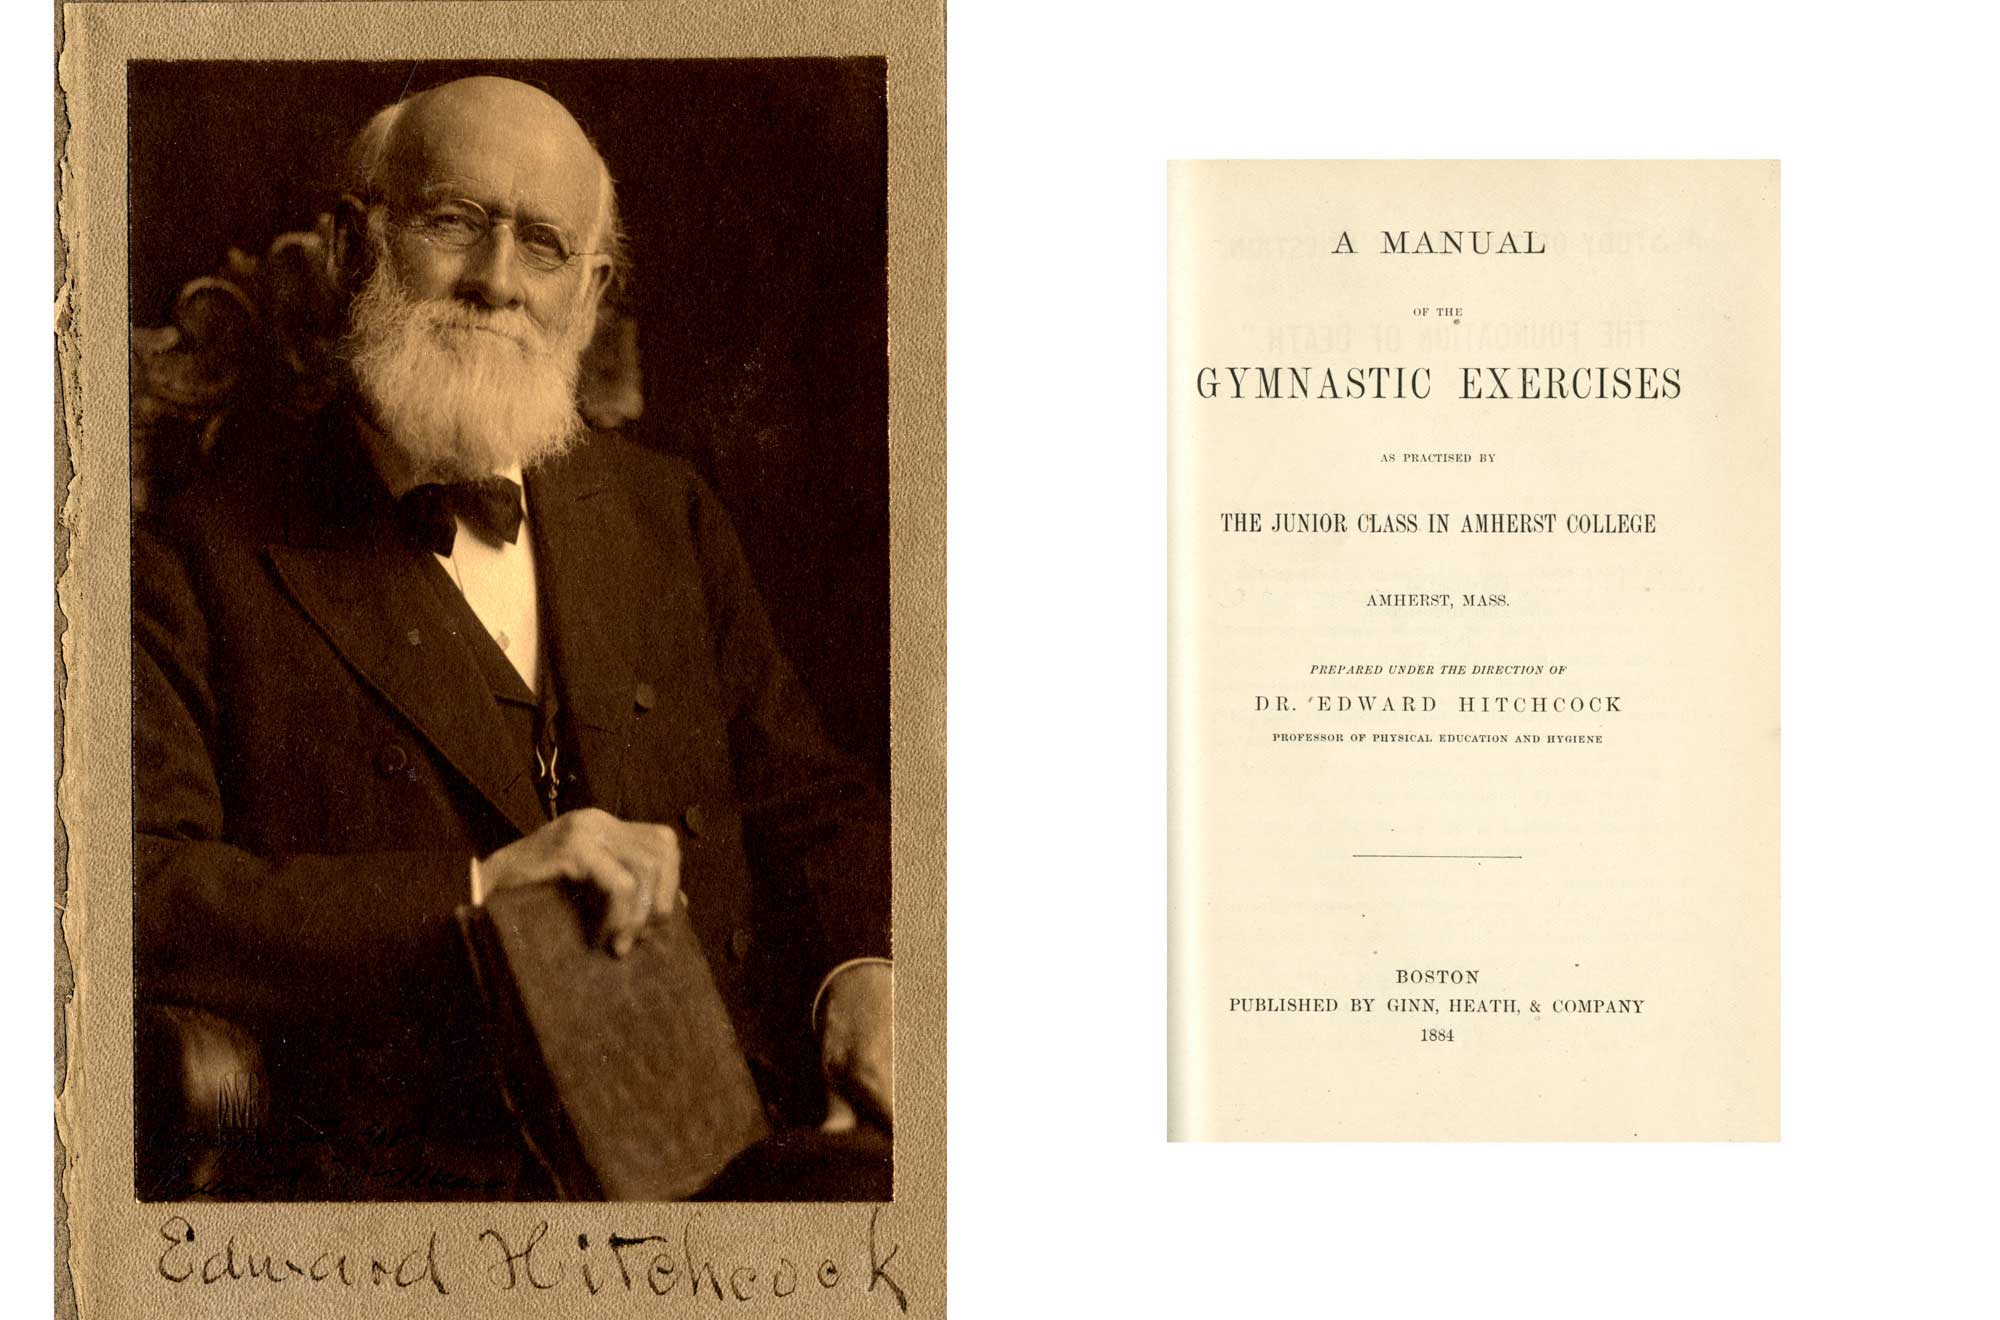 Edward Hitchcock and the cover page from A Manual for Gymnastic Exercise